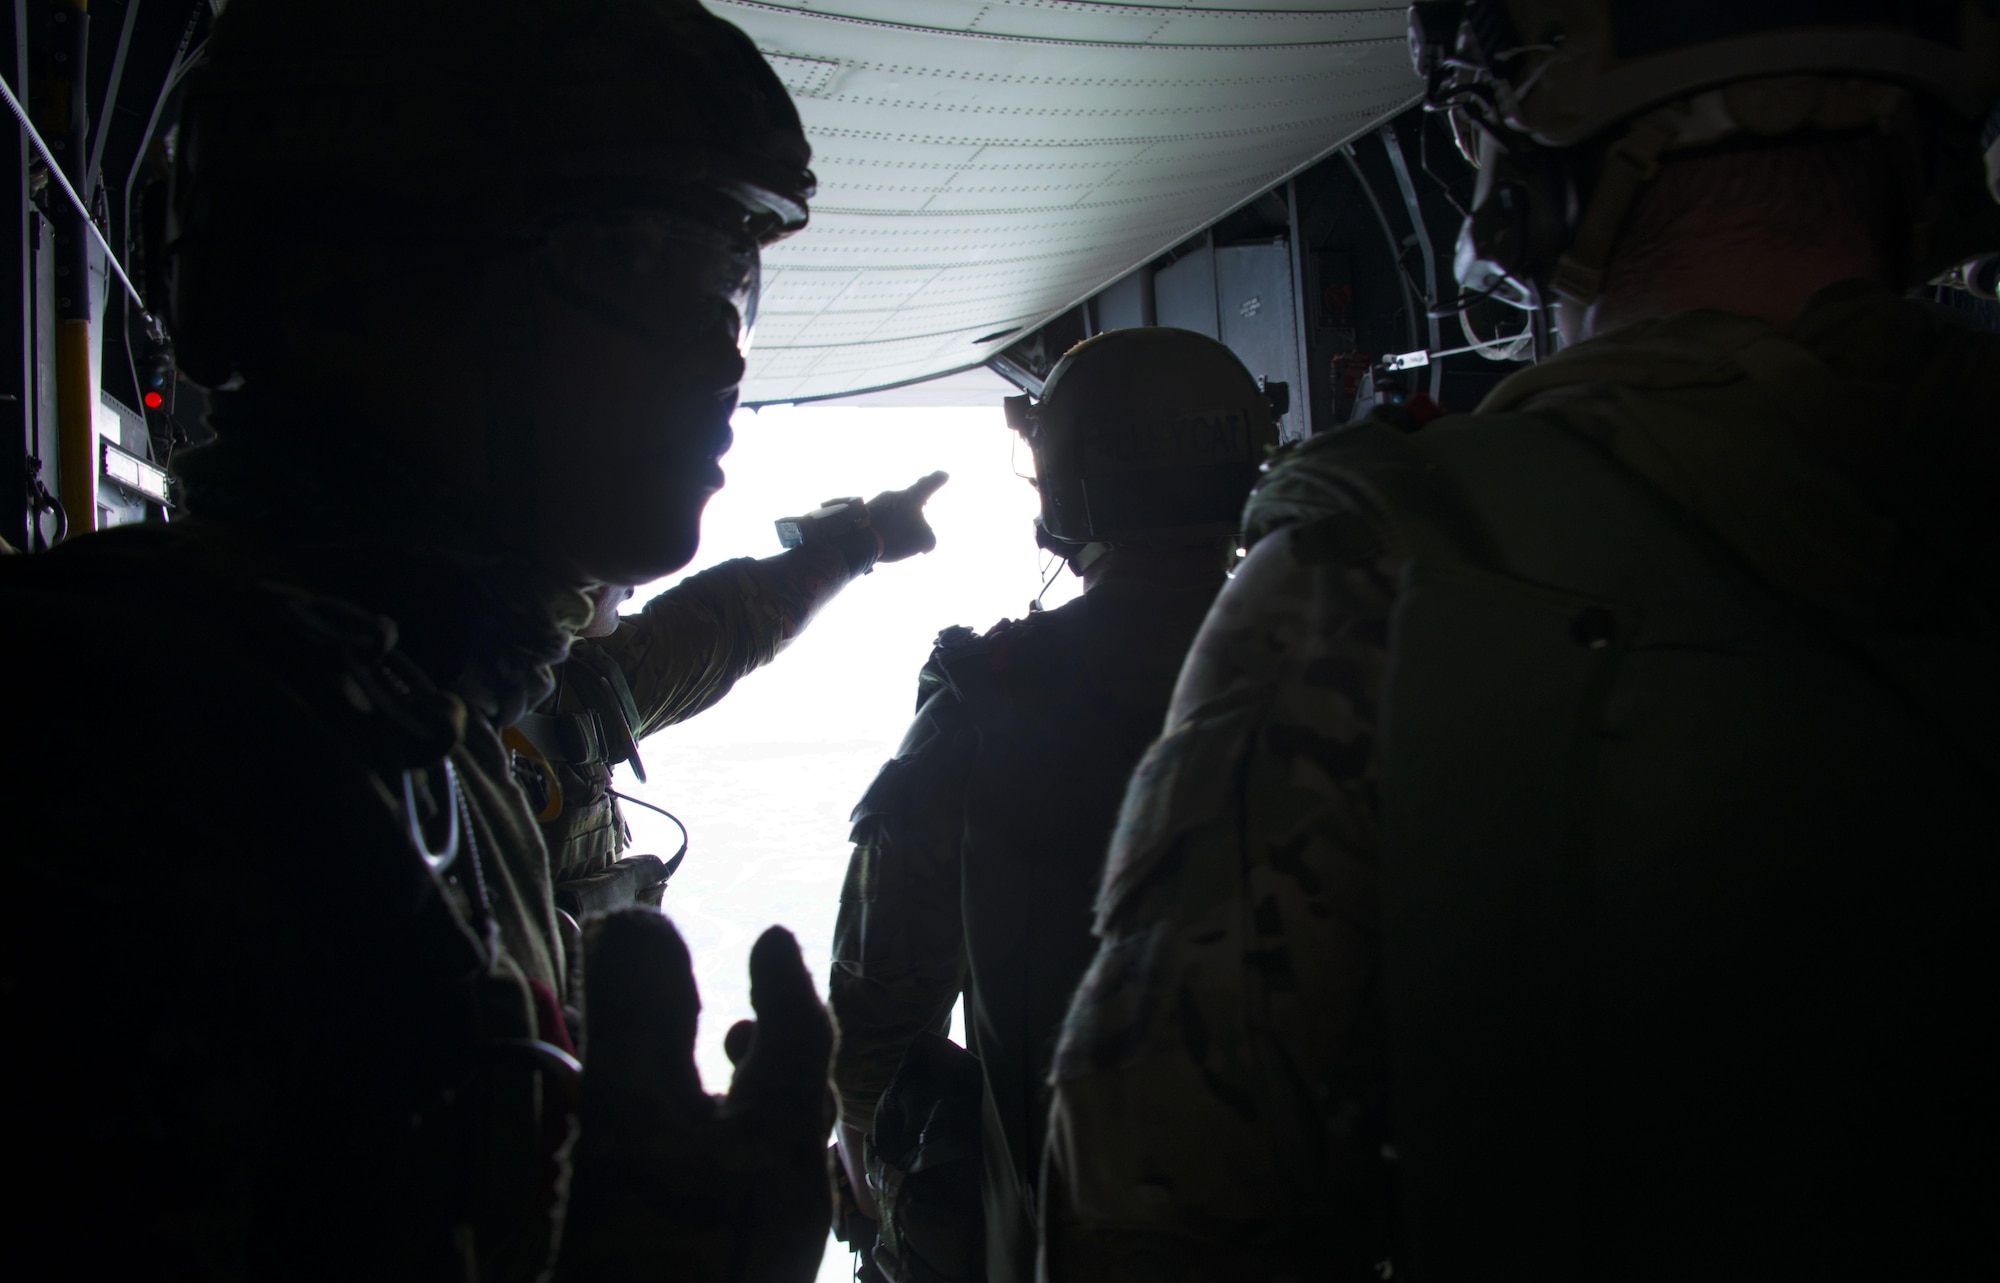 A Philippine Army Light Reaction Regiment (LRR) member instructs team members prior to high-altitude, low-opening (HALO) airdrops from a MC-130H Combat Talon II. Getting a U.S. aircraft dedicated for military free-fall operations is very rare for the Armed Forces Philippines and speaks to our enduring partnership and commitment to their success. (U.S. Air Force photo by Capt. Jessica Tait)